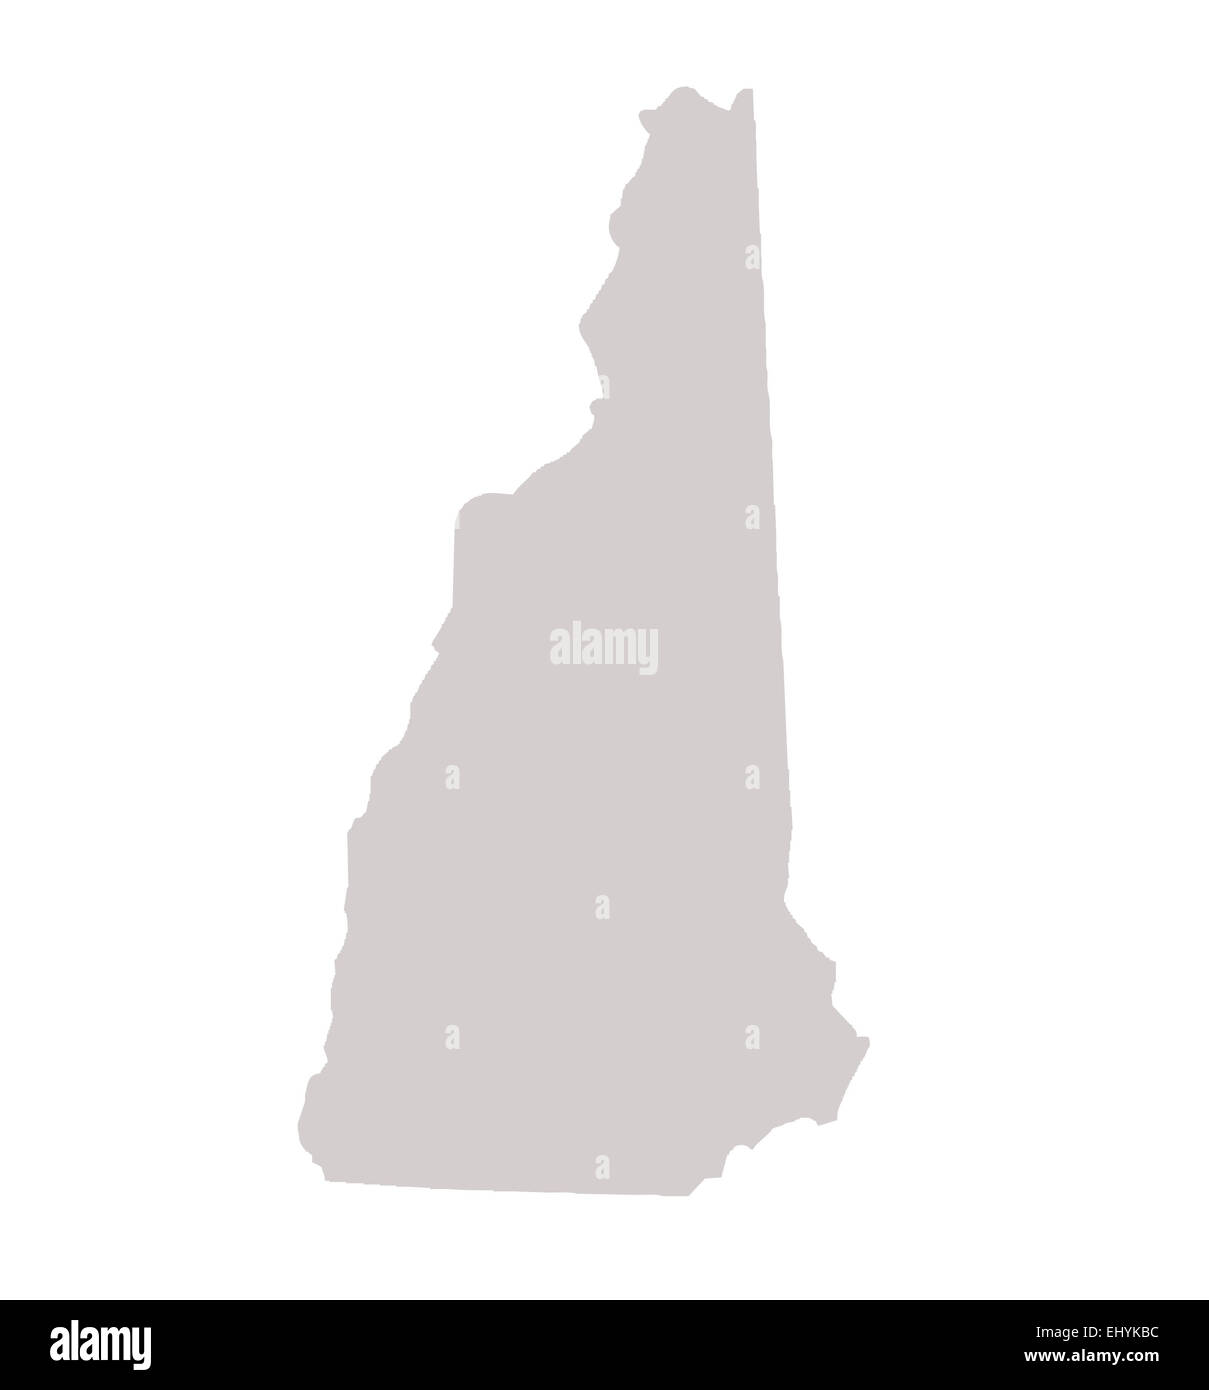 New Hampshire State map isolated on a white background, USA. Stock Photo